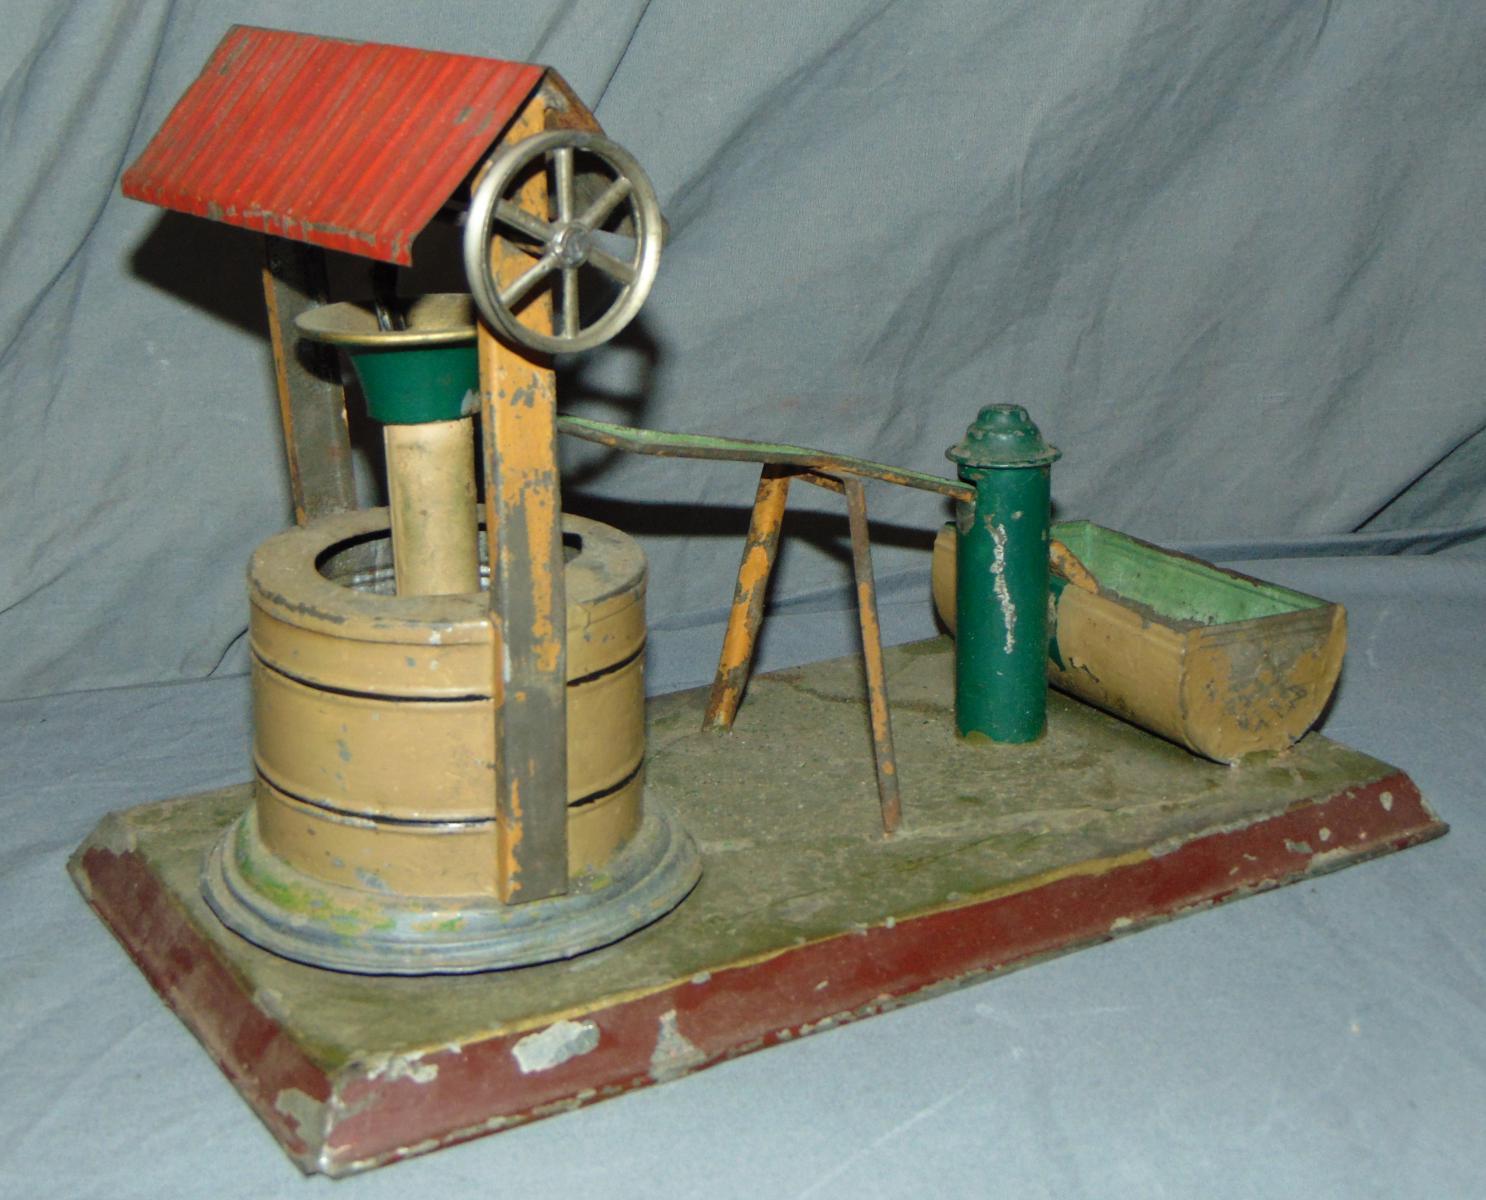 4 Early German Toys